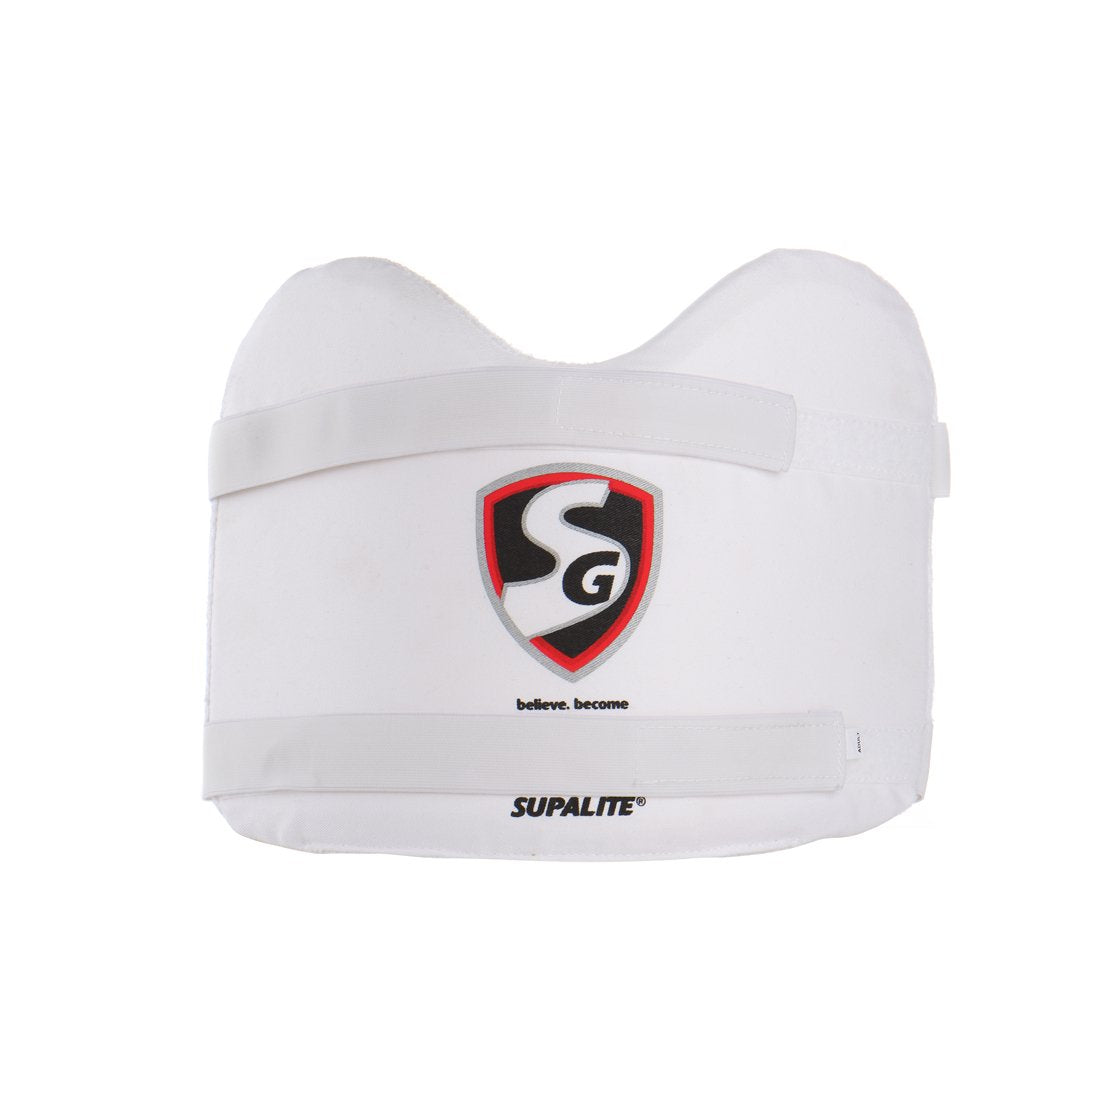 SG Supalite Junior / Youth Chest Guard